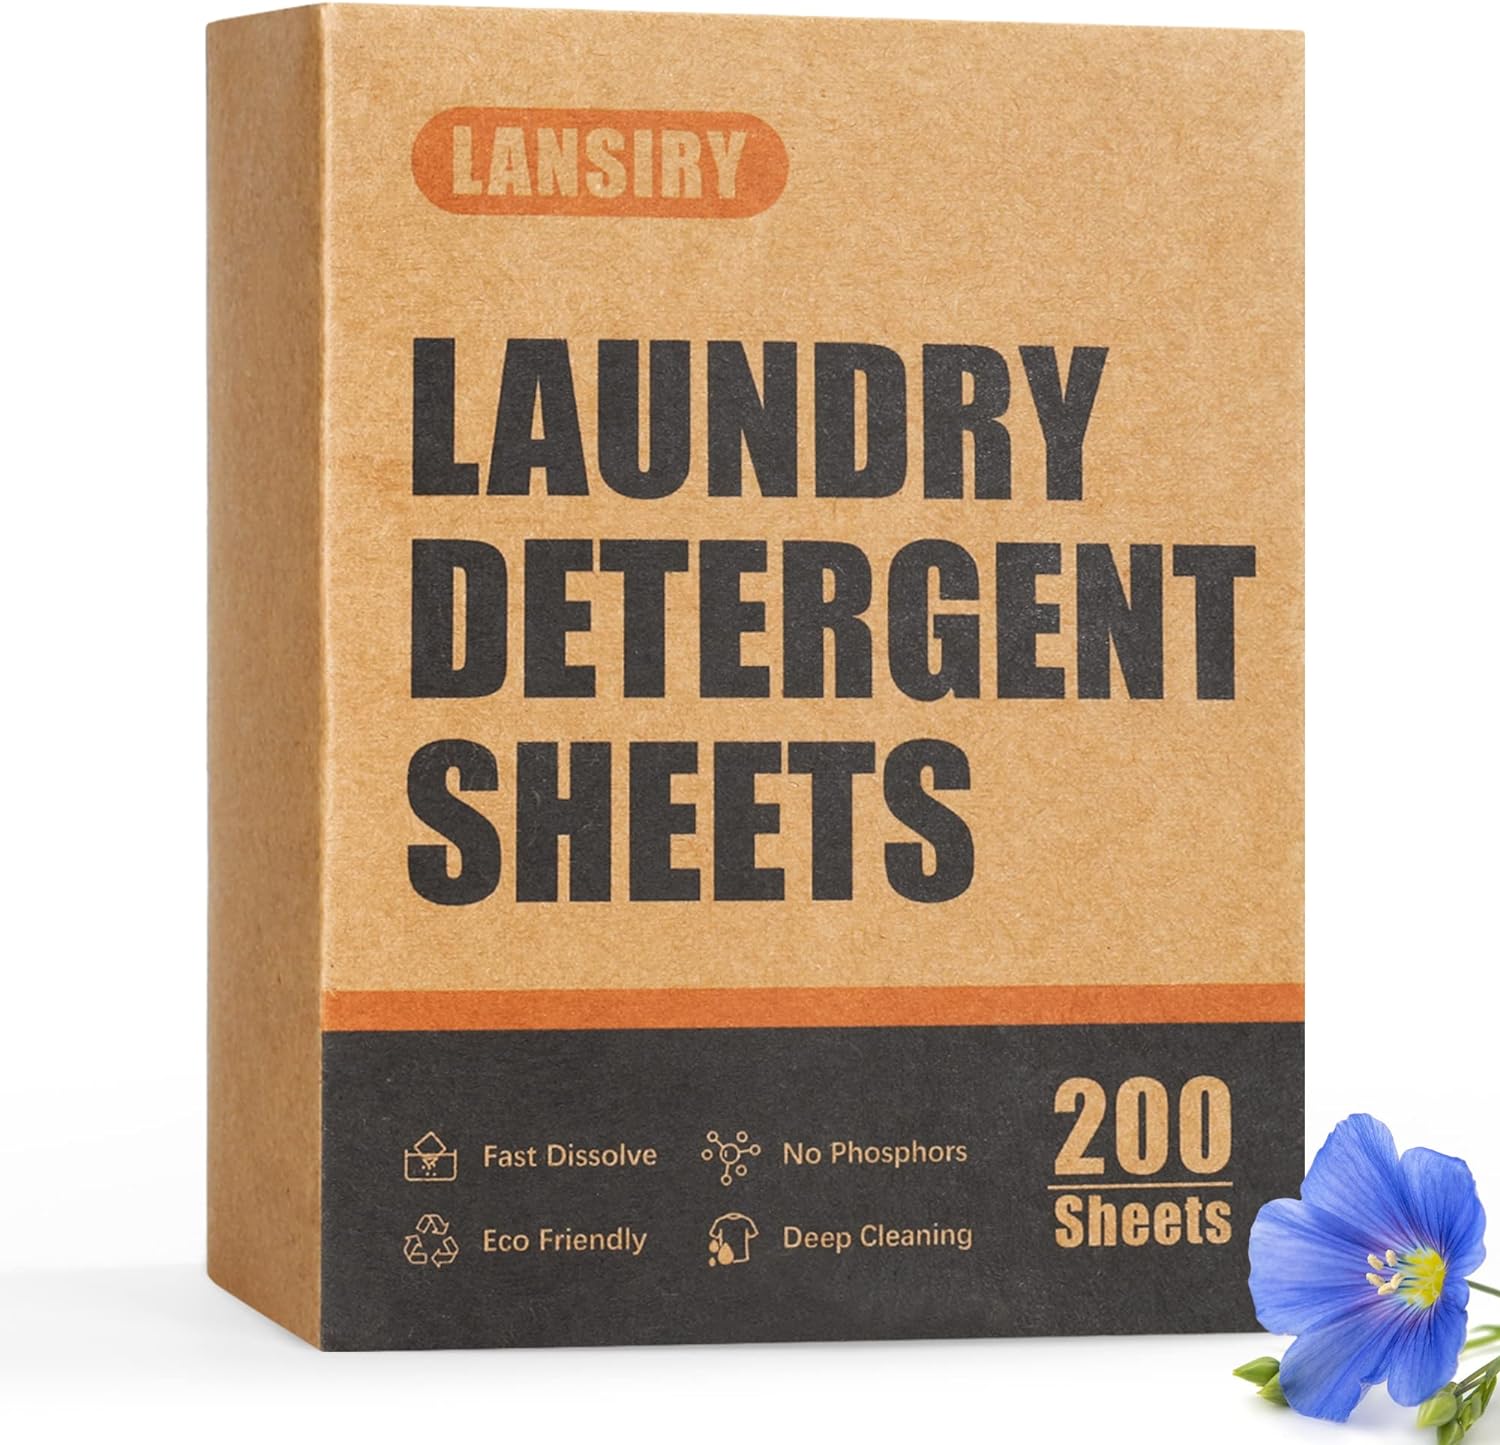 LANSIRY Liquidless Laundry Detergent Sheets Review